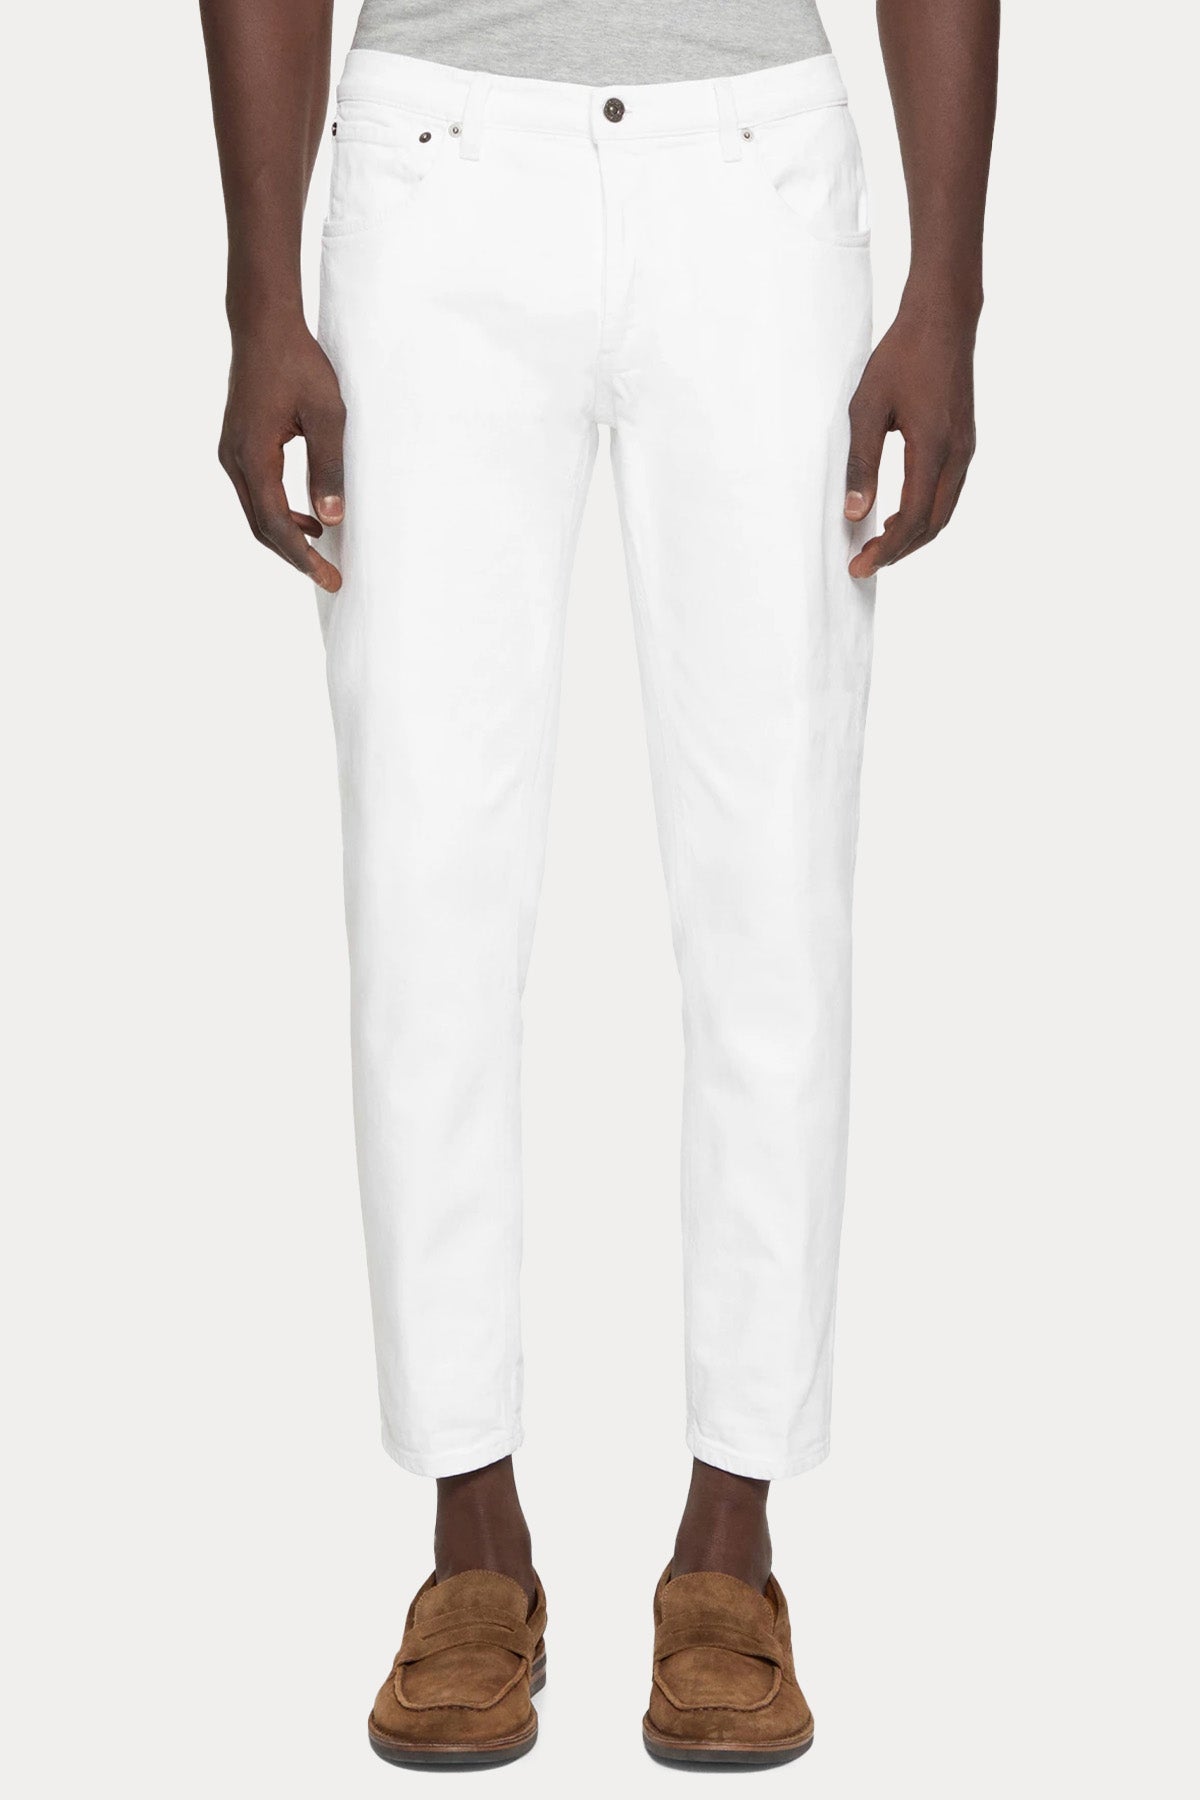 Dondup Brighton Carrot Fit Jeans